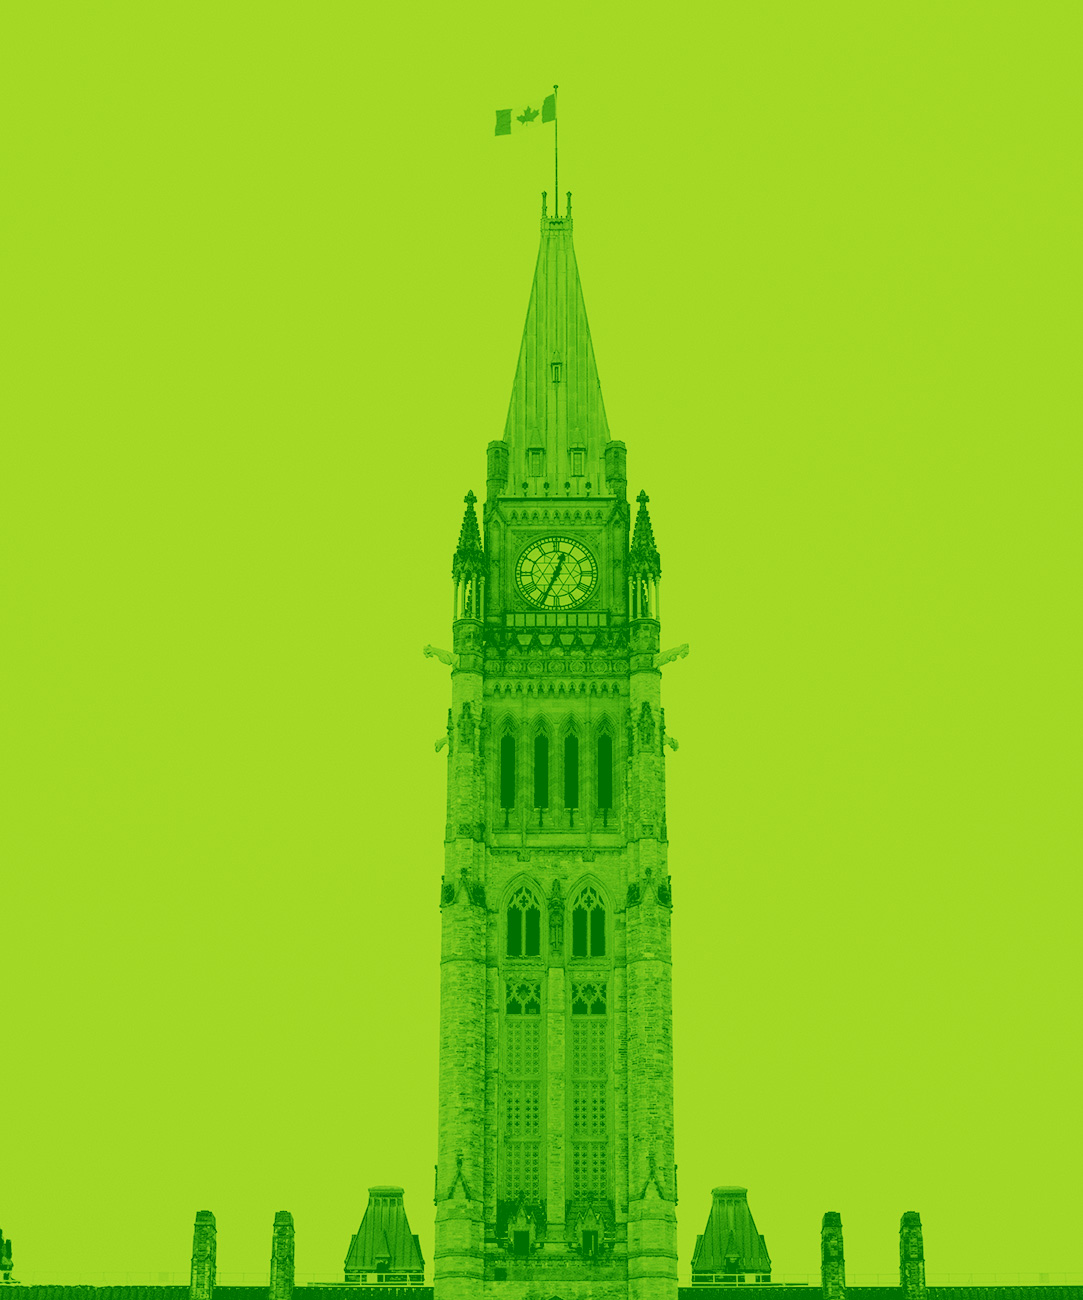 Top of parliament building, Ottawa, in green filter